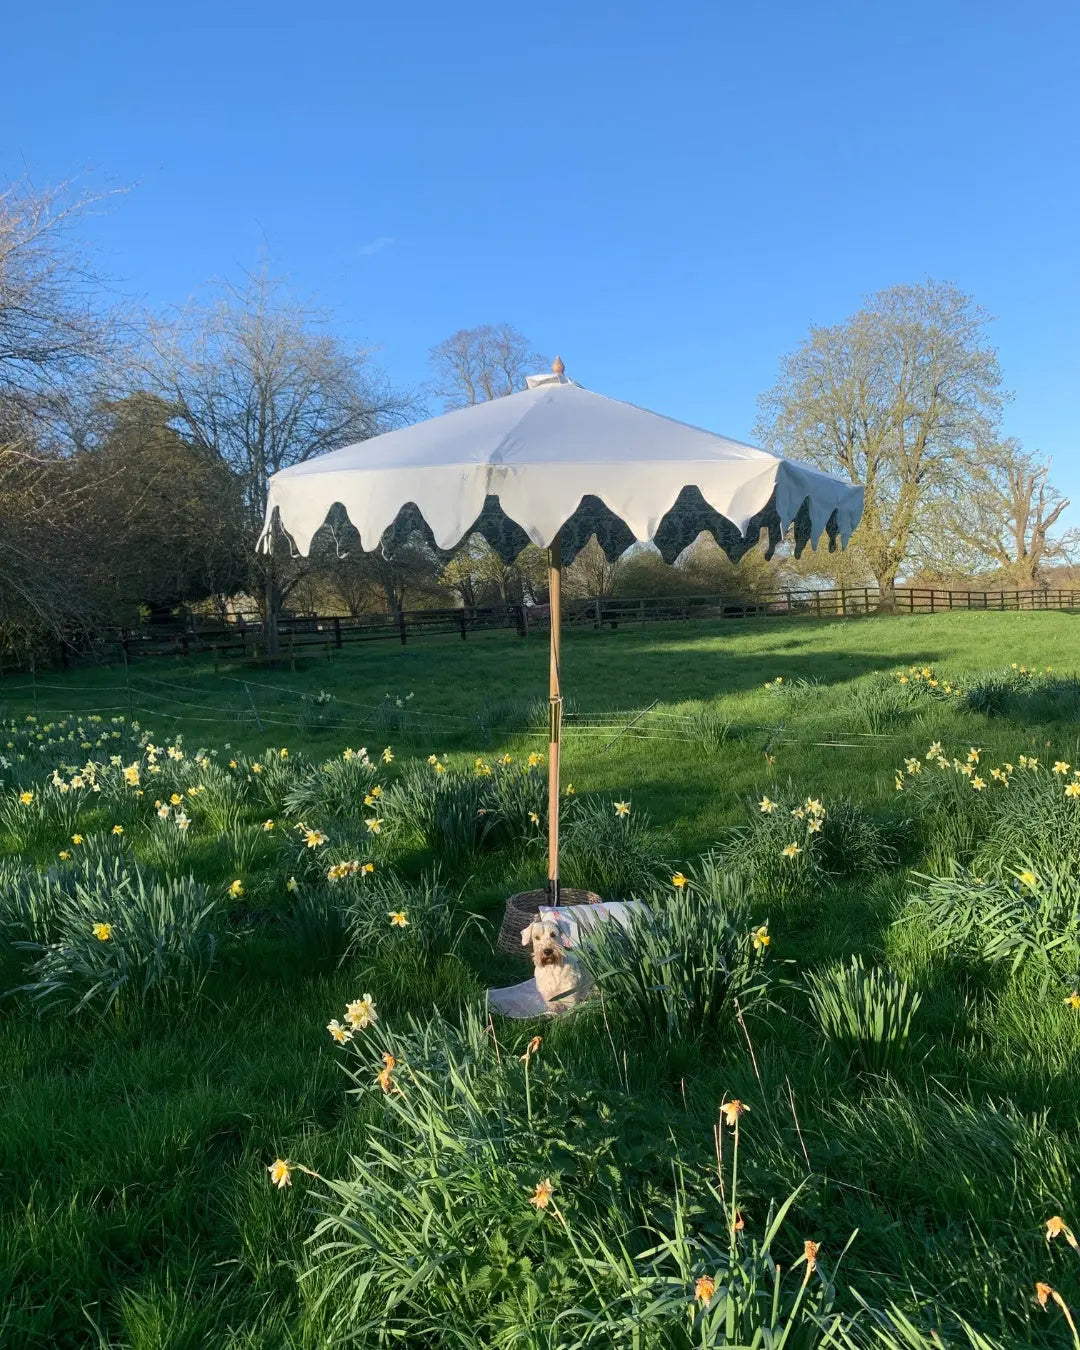 What Makes Parasol-UK’s Creation the Perfect Garden Parasol?